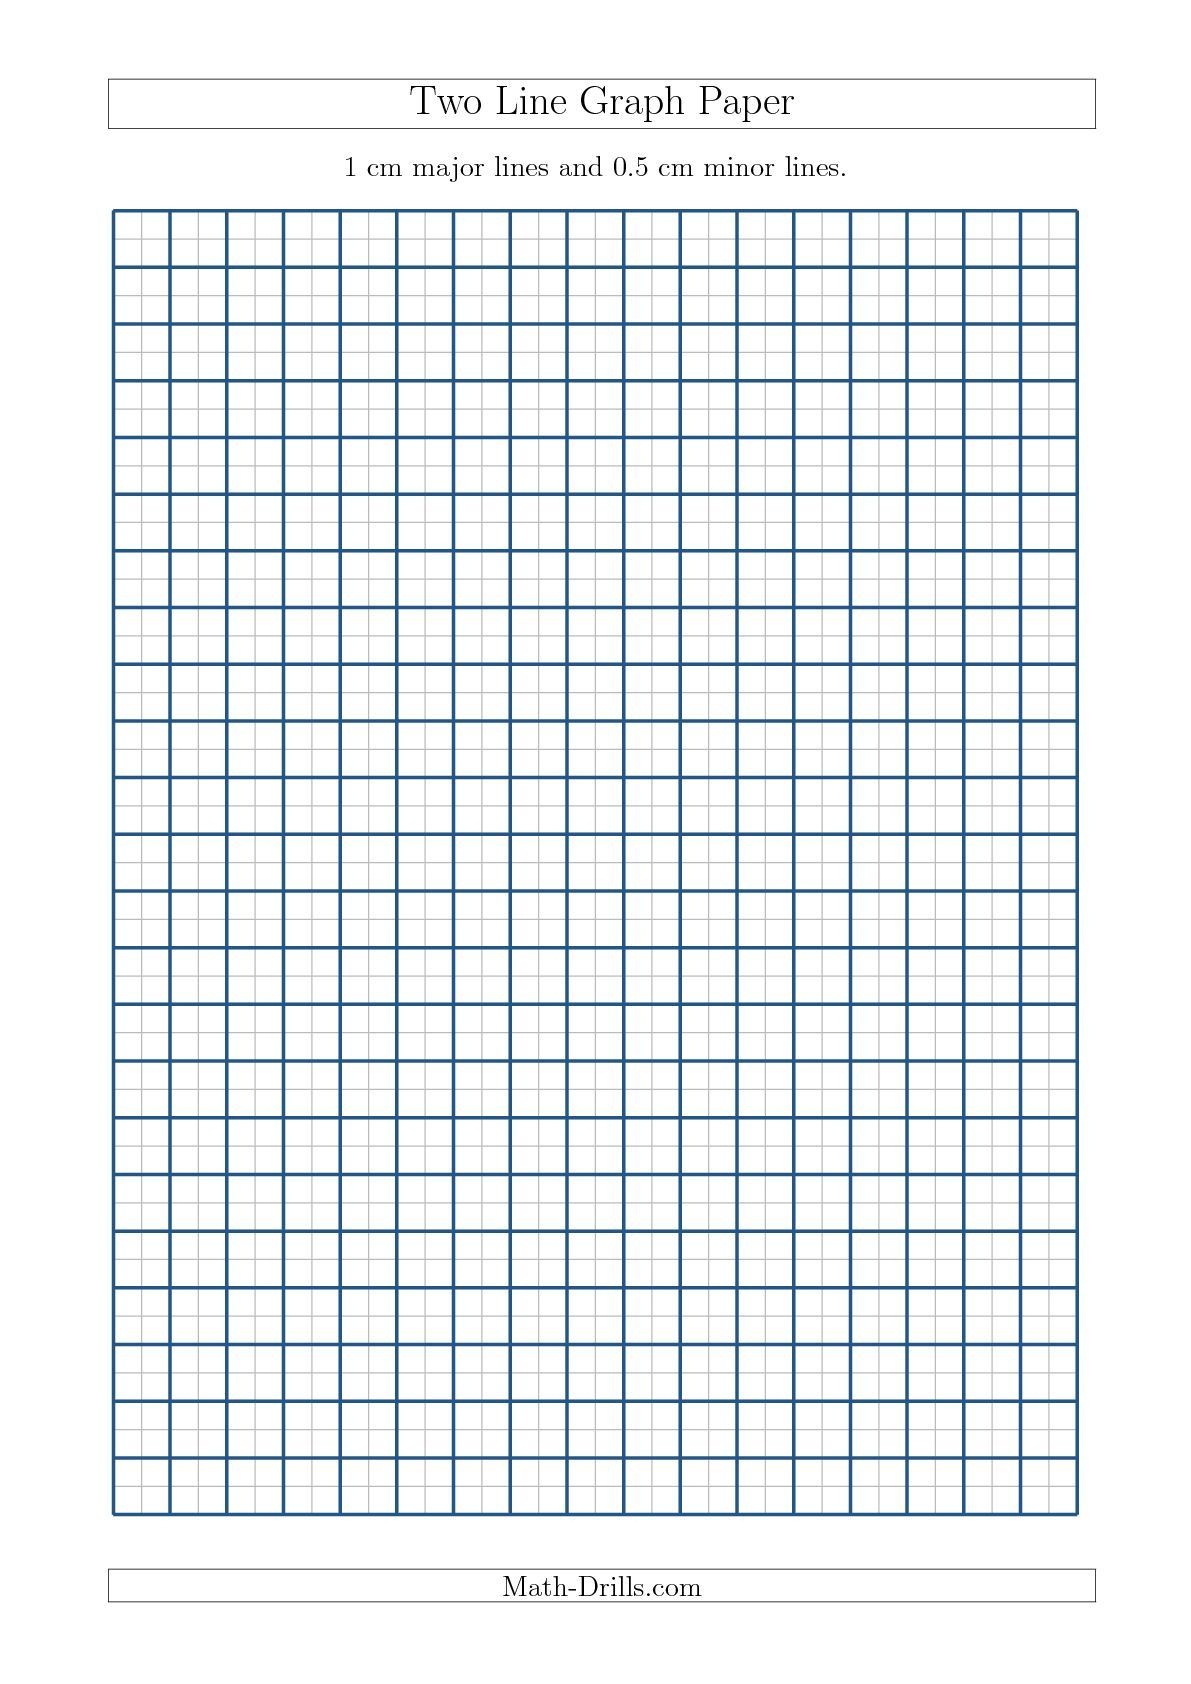 Two Line Graph Paper With 1 Cm Major Lines And 0.5 Cm Minor Lines - Cm Graph Paper Free Printable